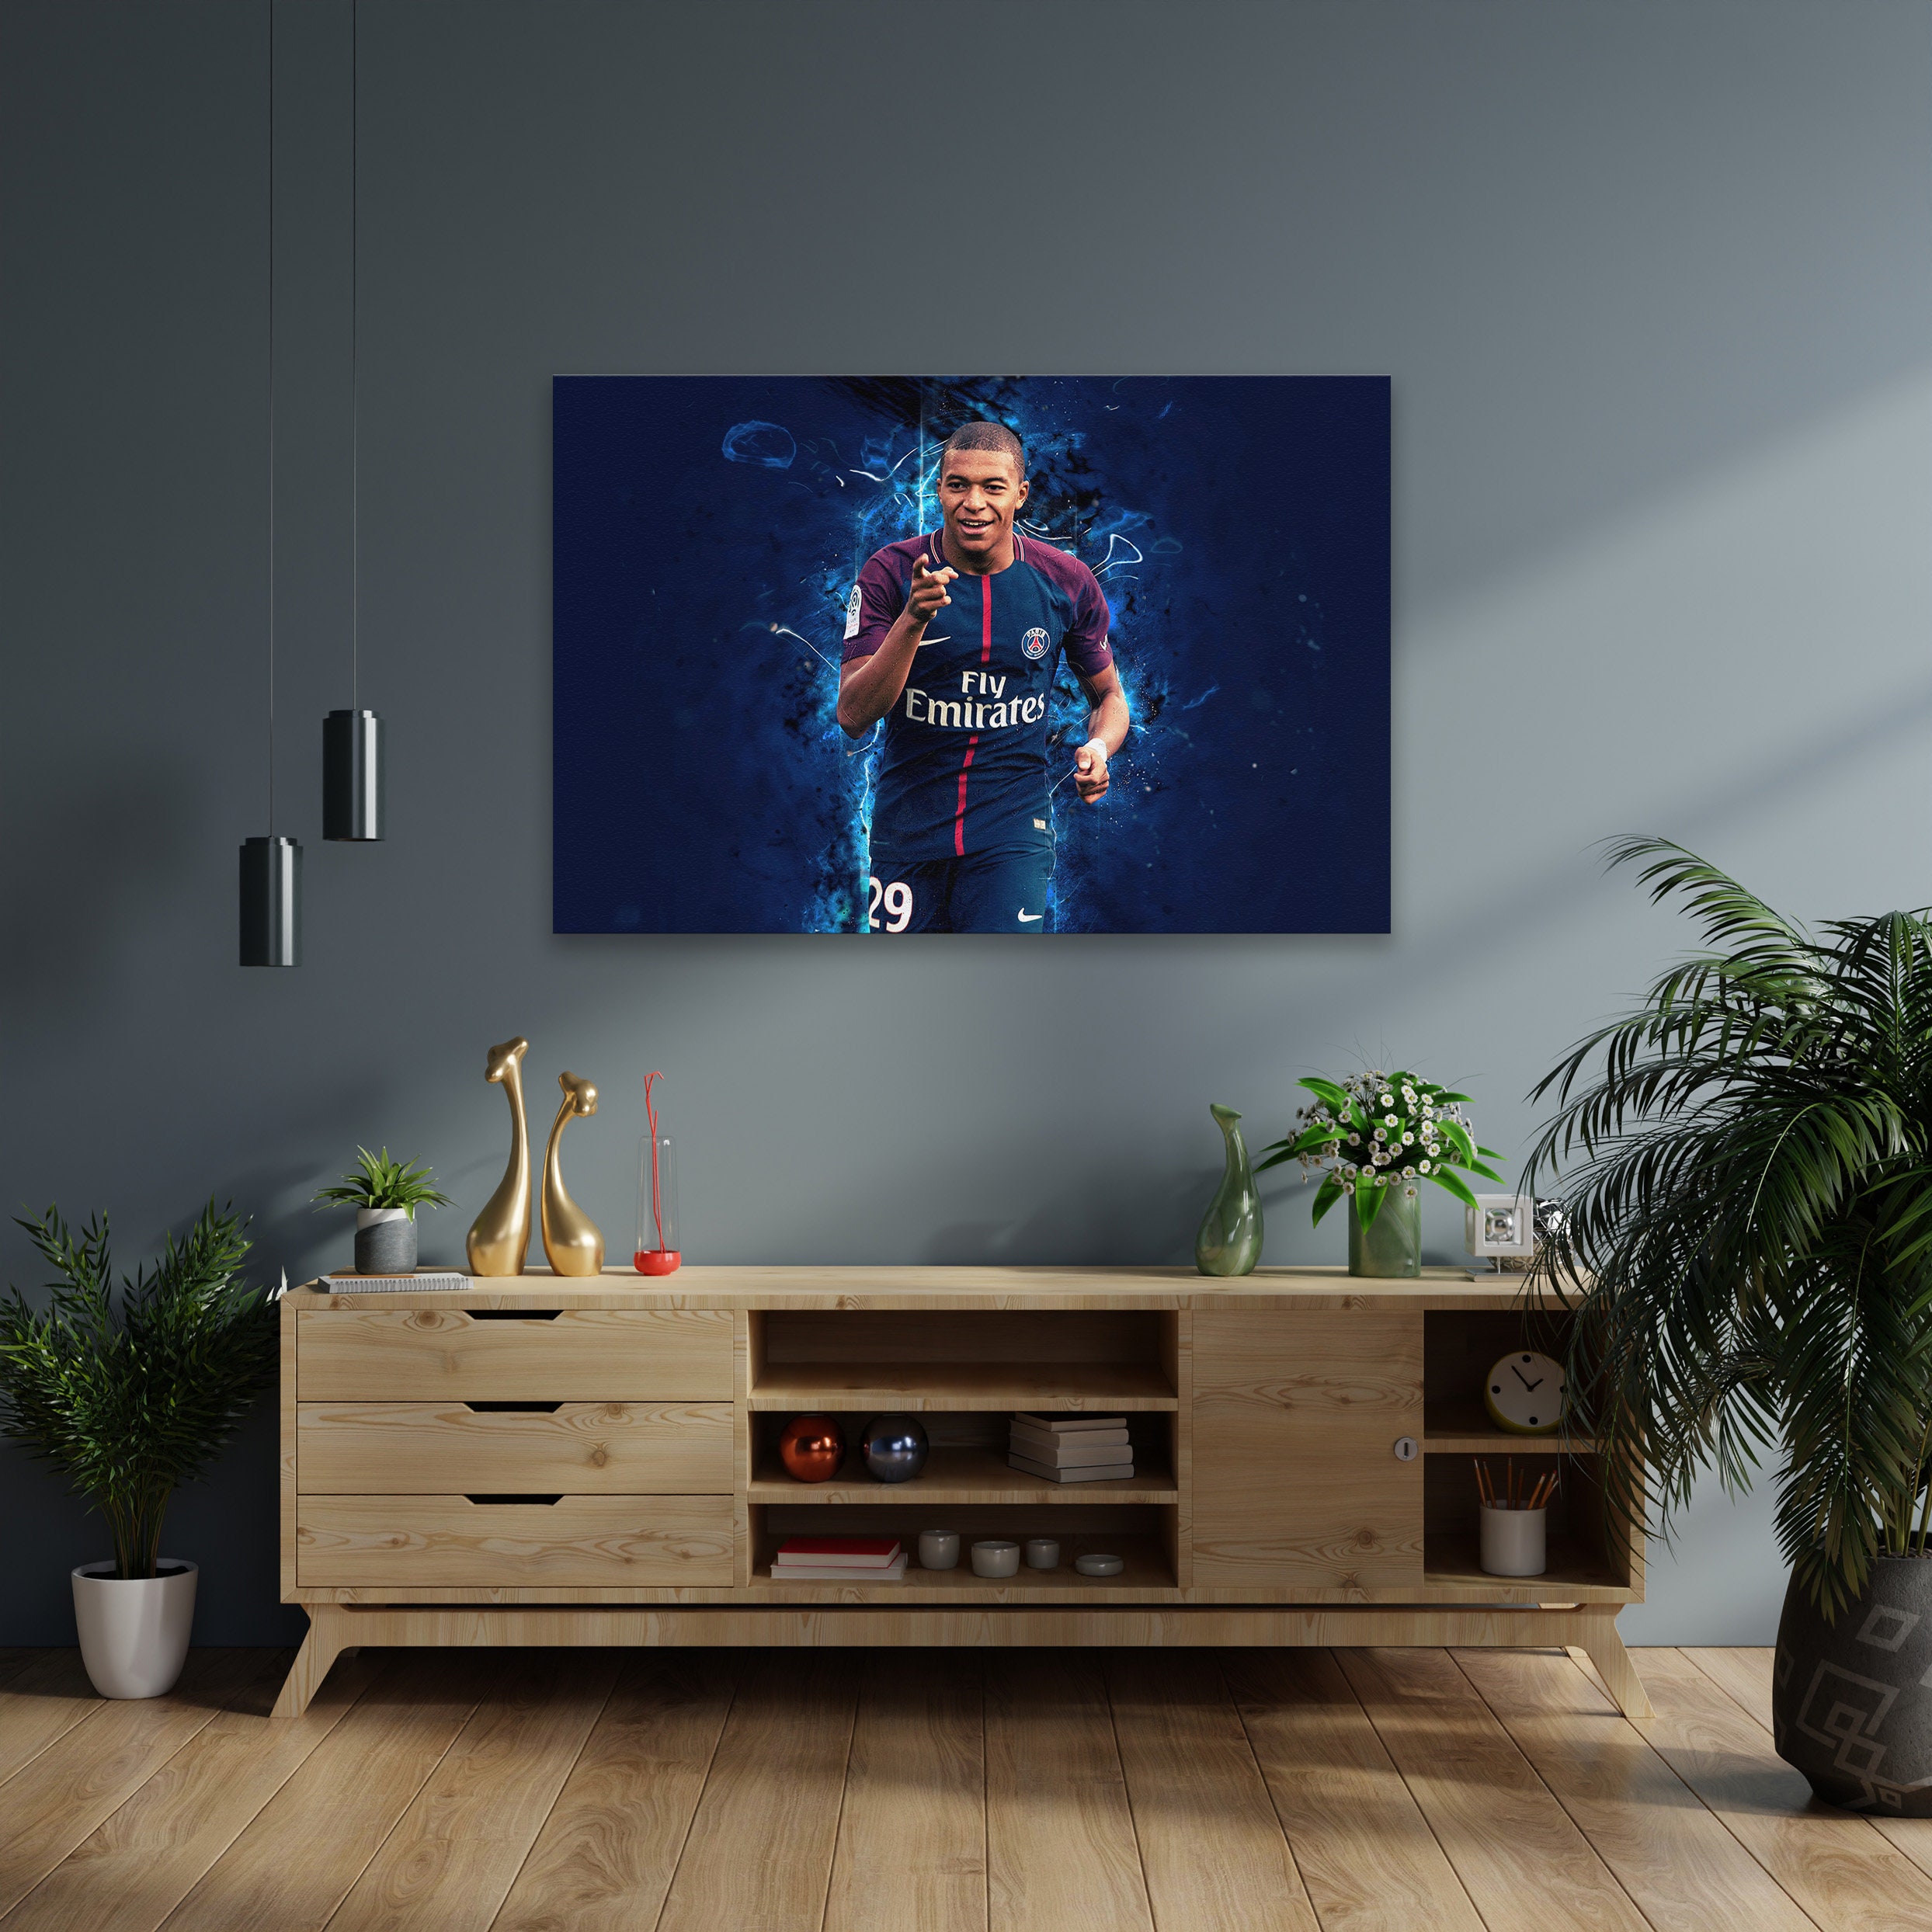 Kylian Mbappé footballer Decal Removable Vinyl Mural Poster For Kids Room  Living Room Home Decor Wall Decal Home Decor - AliExpress